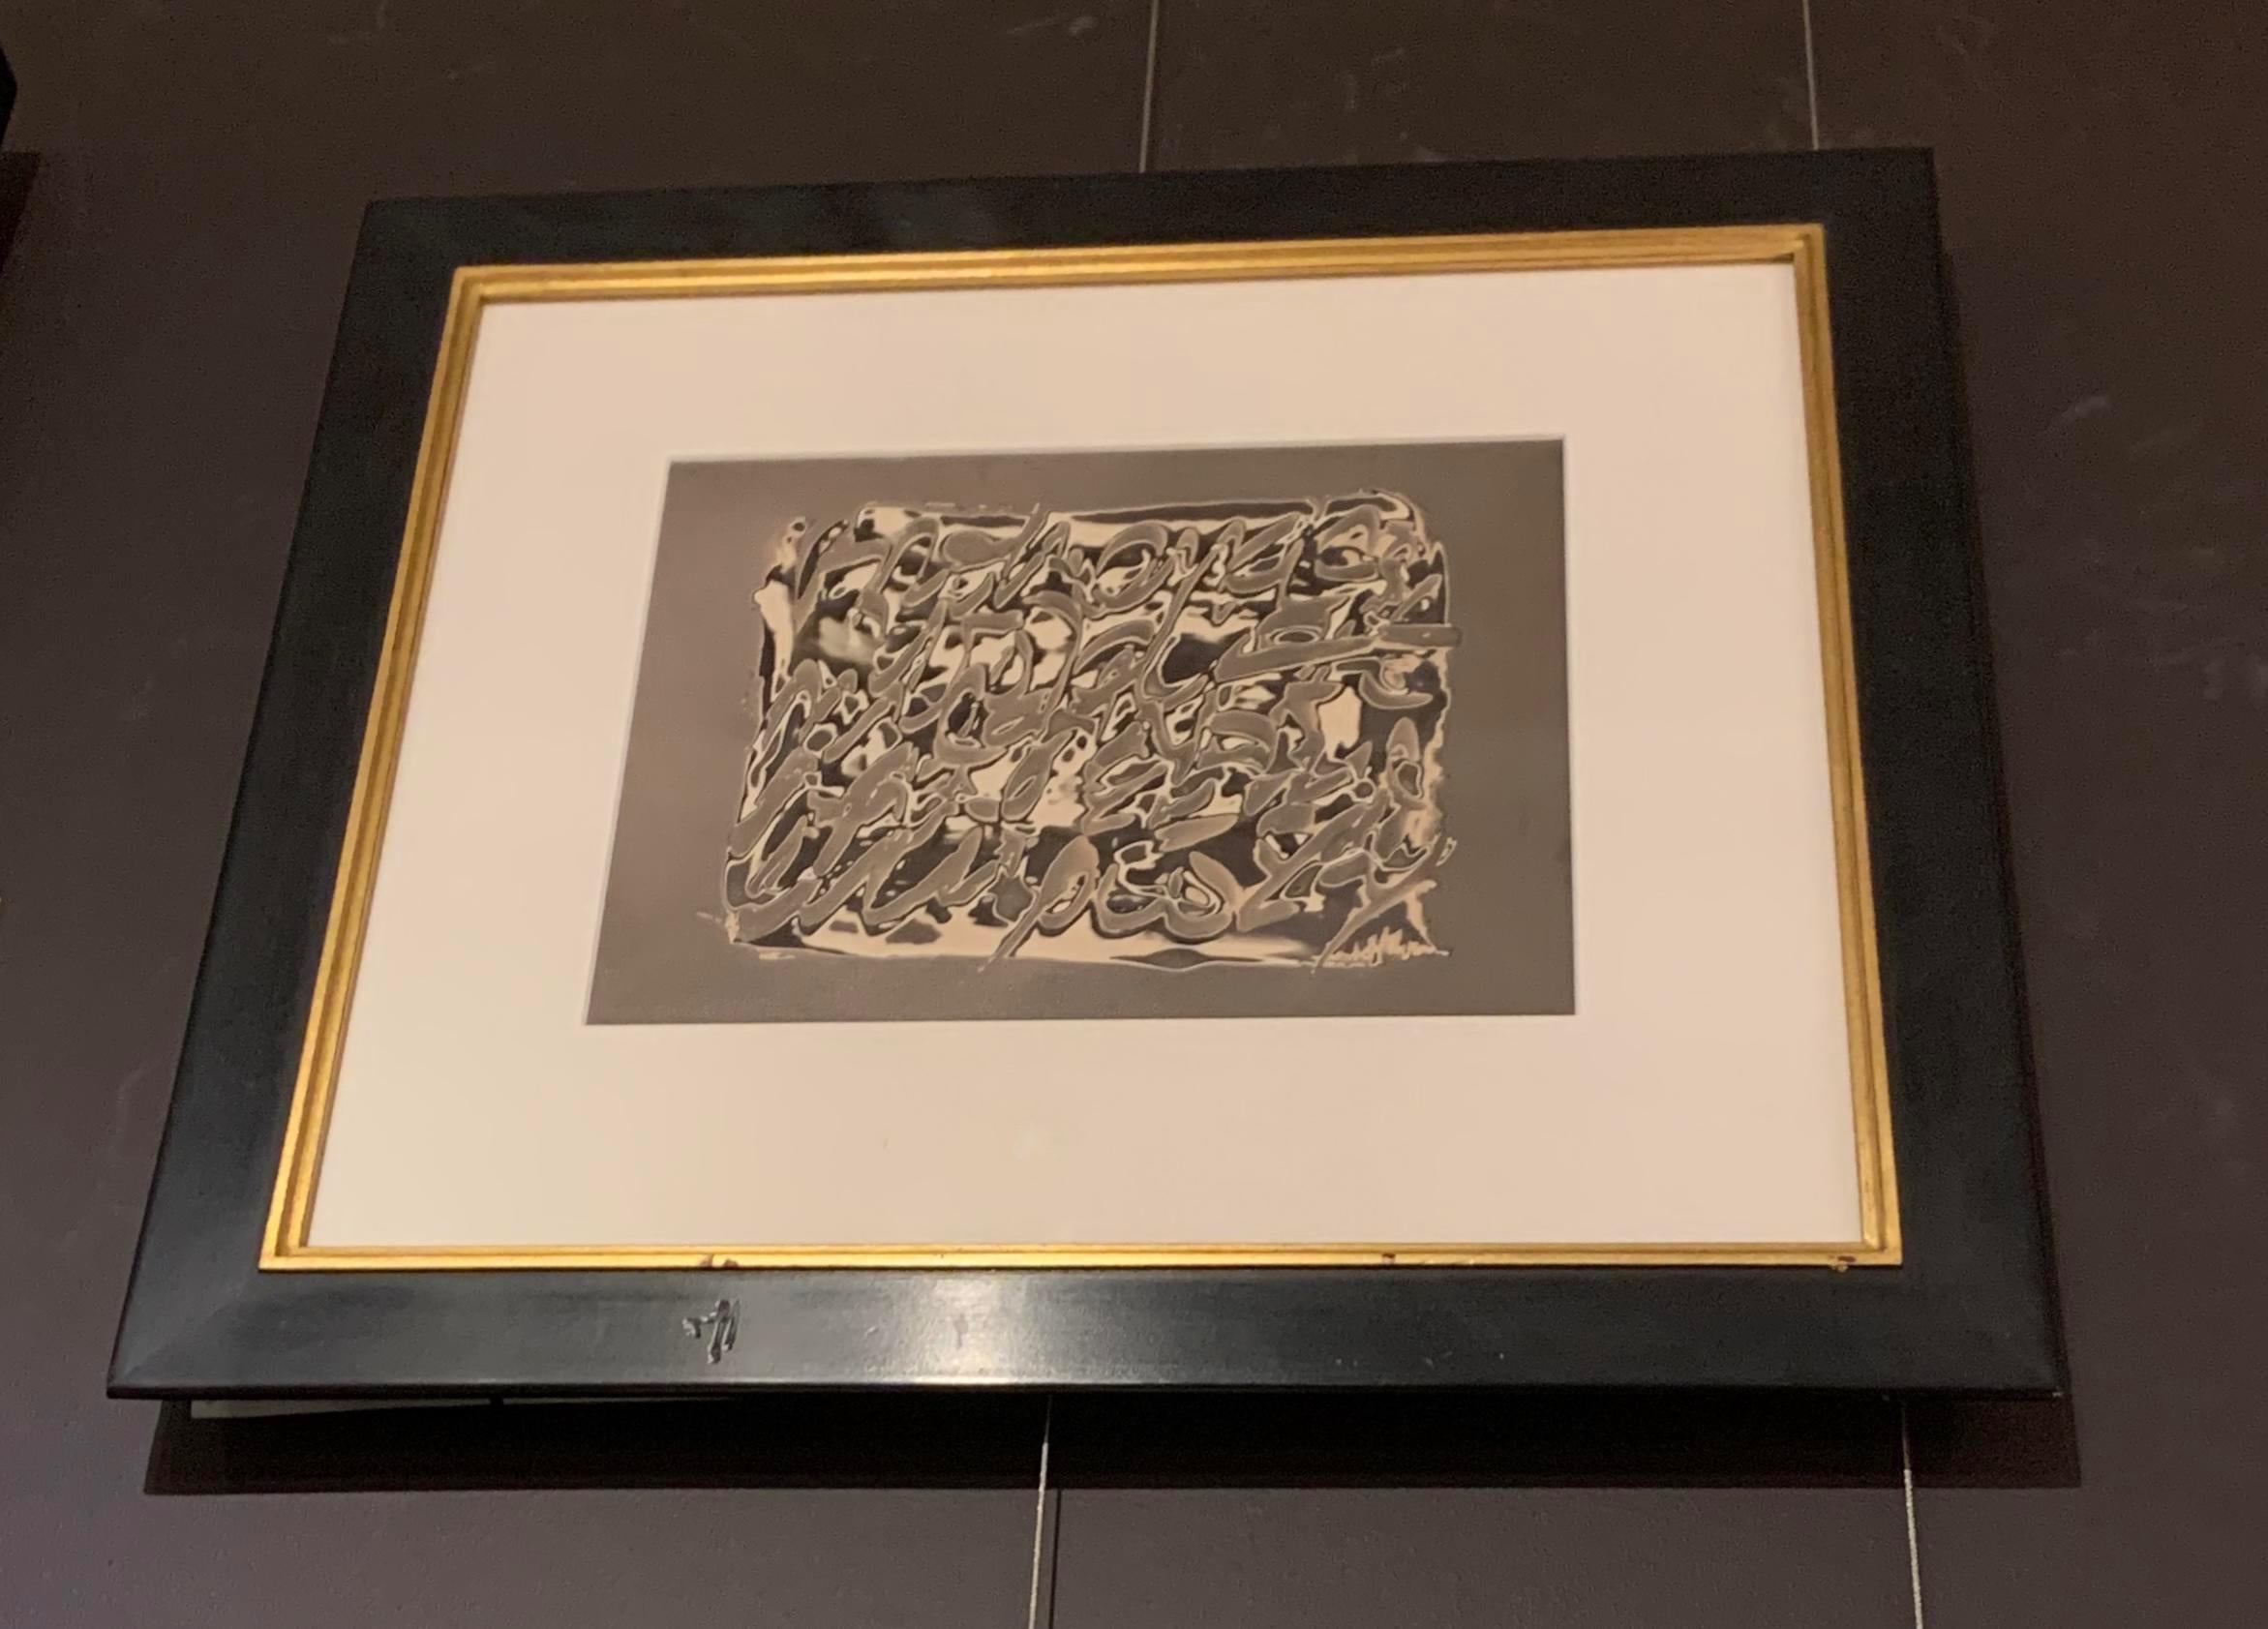 1970s Belgian photographer Jean-Paul Debattice chemigram.
Framed in a black wood with gold trim frame.
We have a large collection of chemigrams by this photographer.